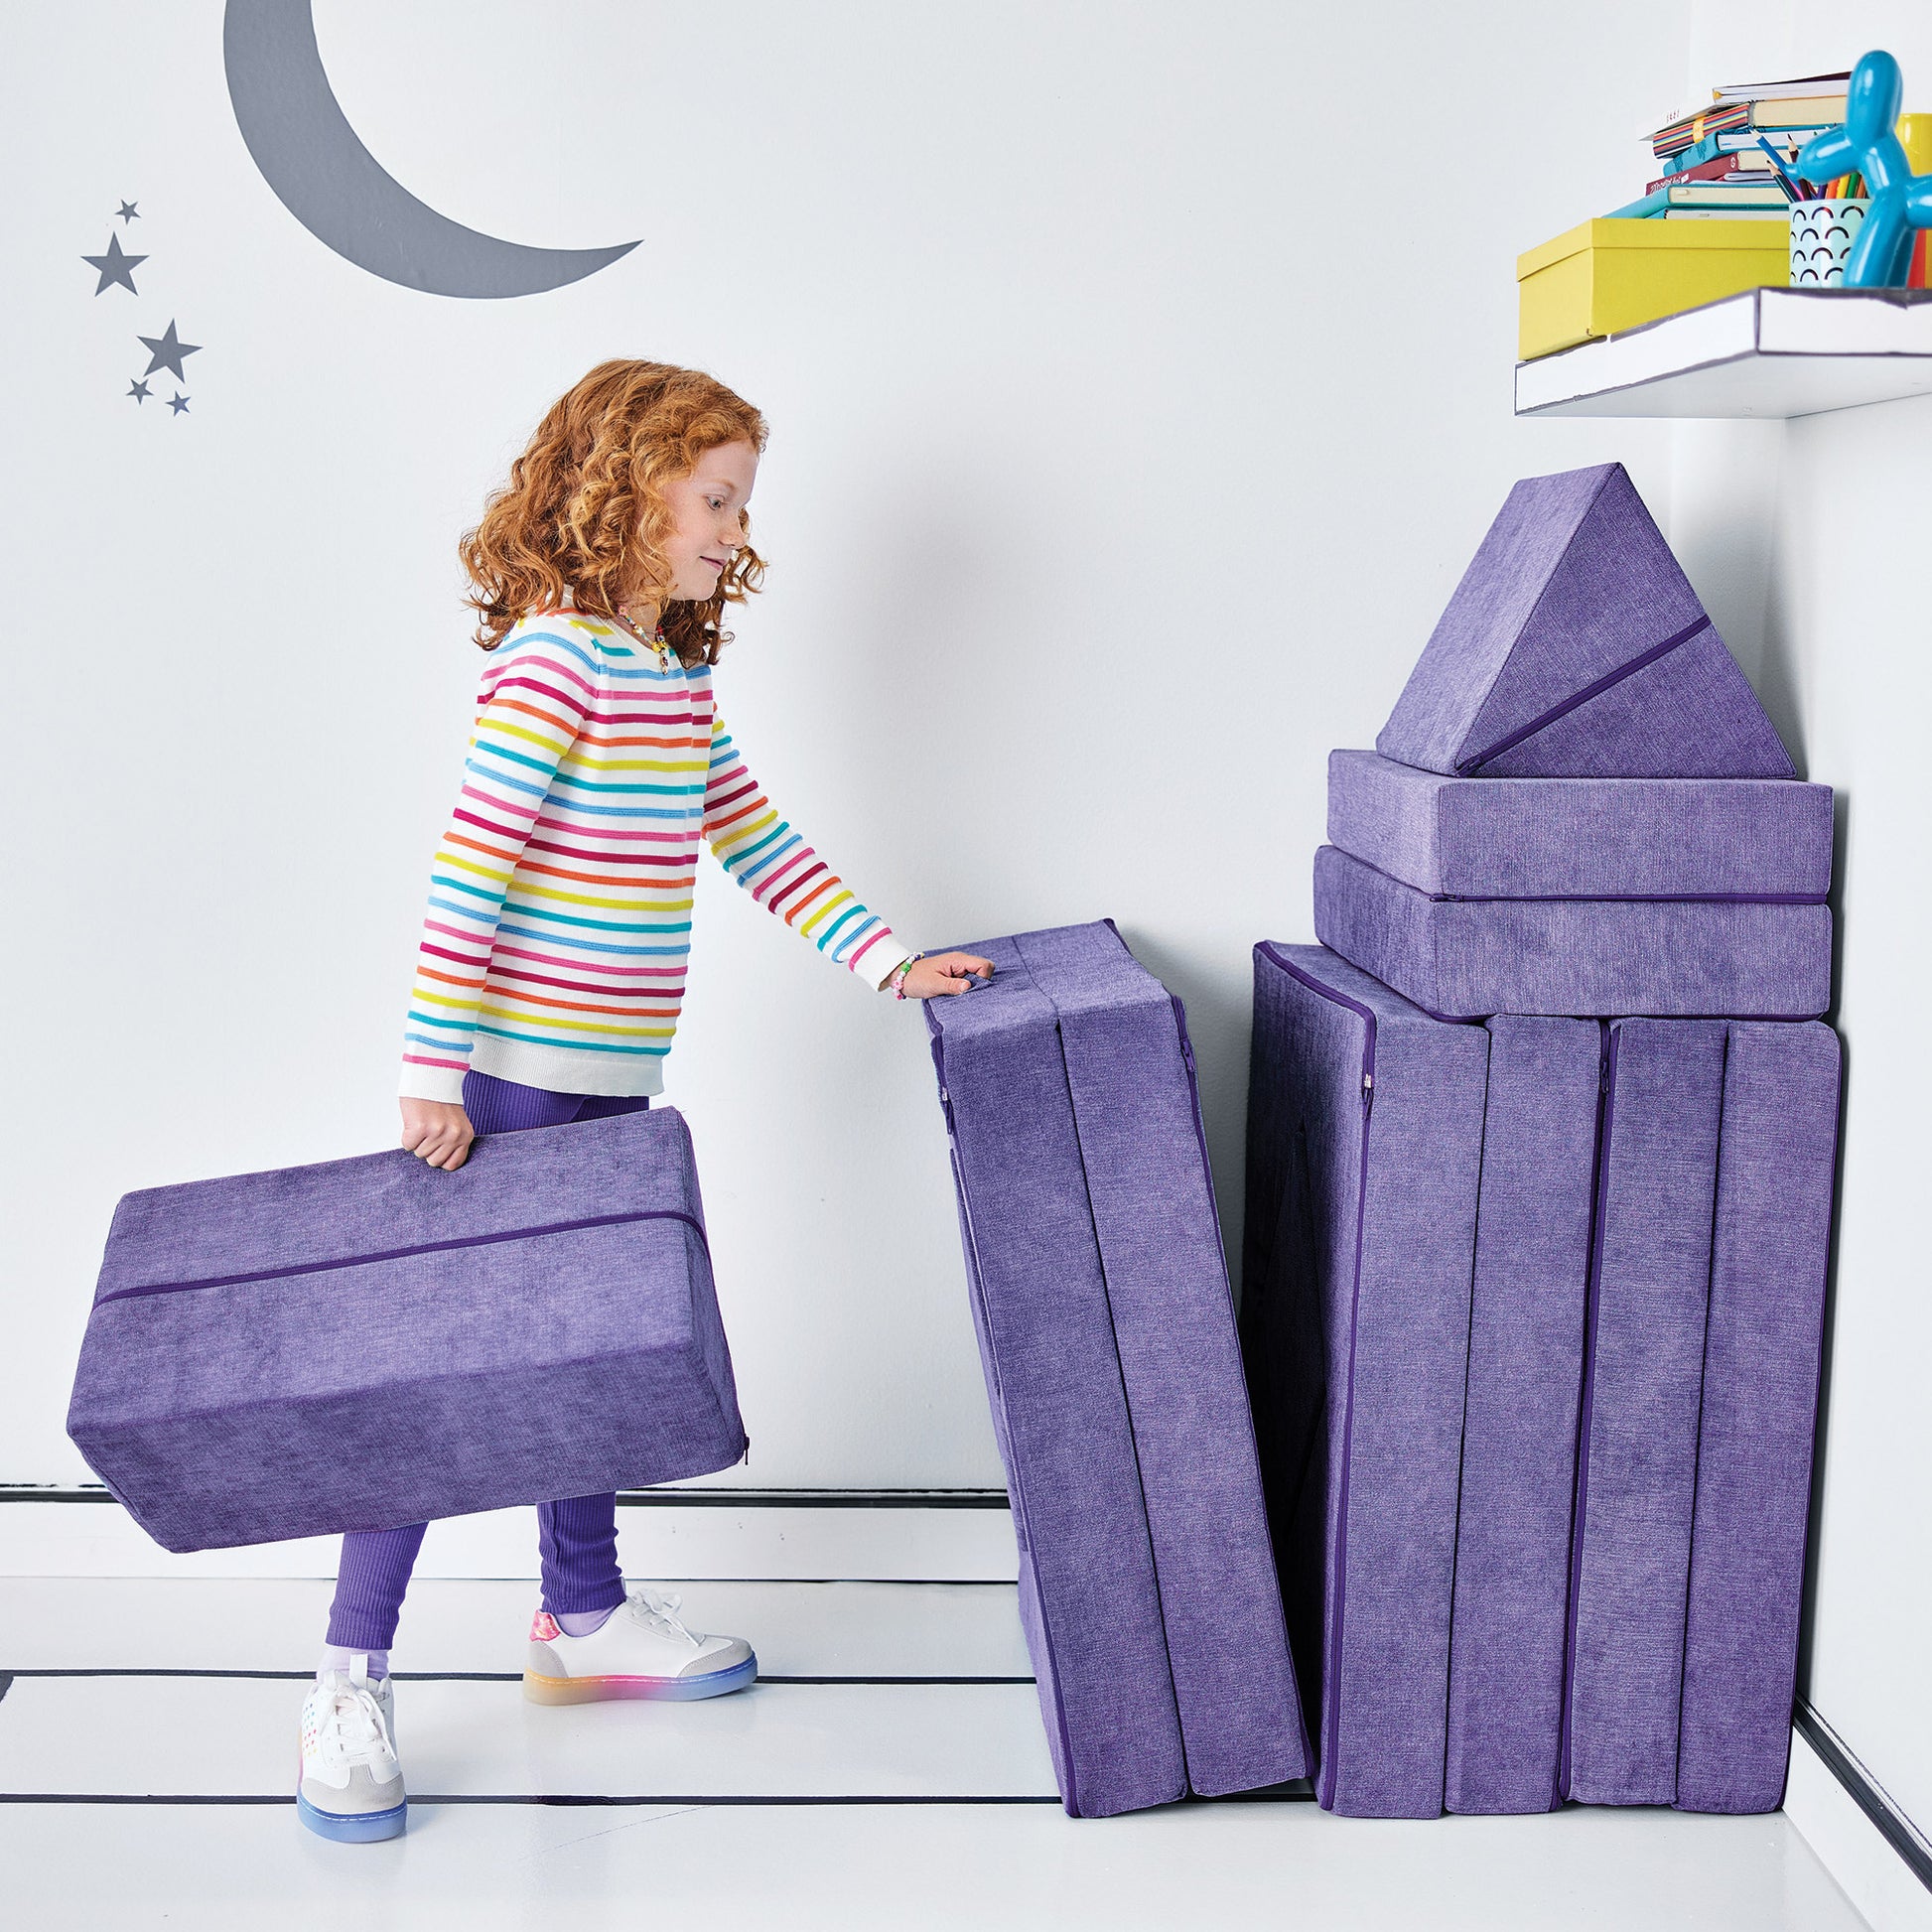 Kids Convertible Play Fort